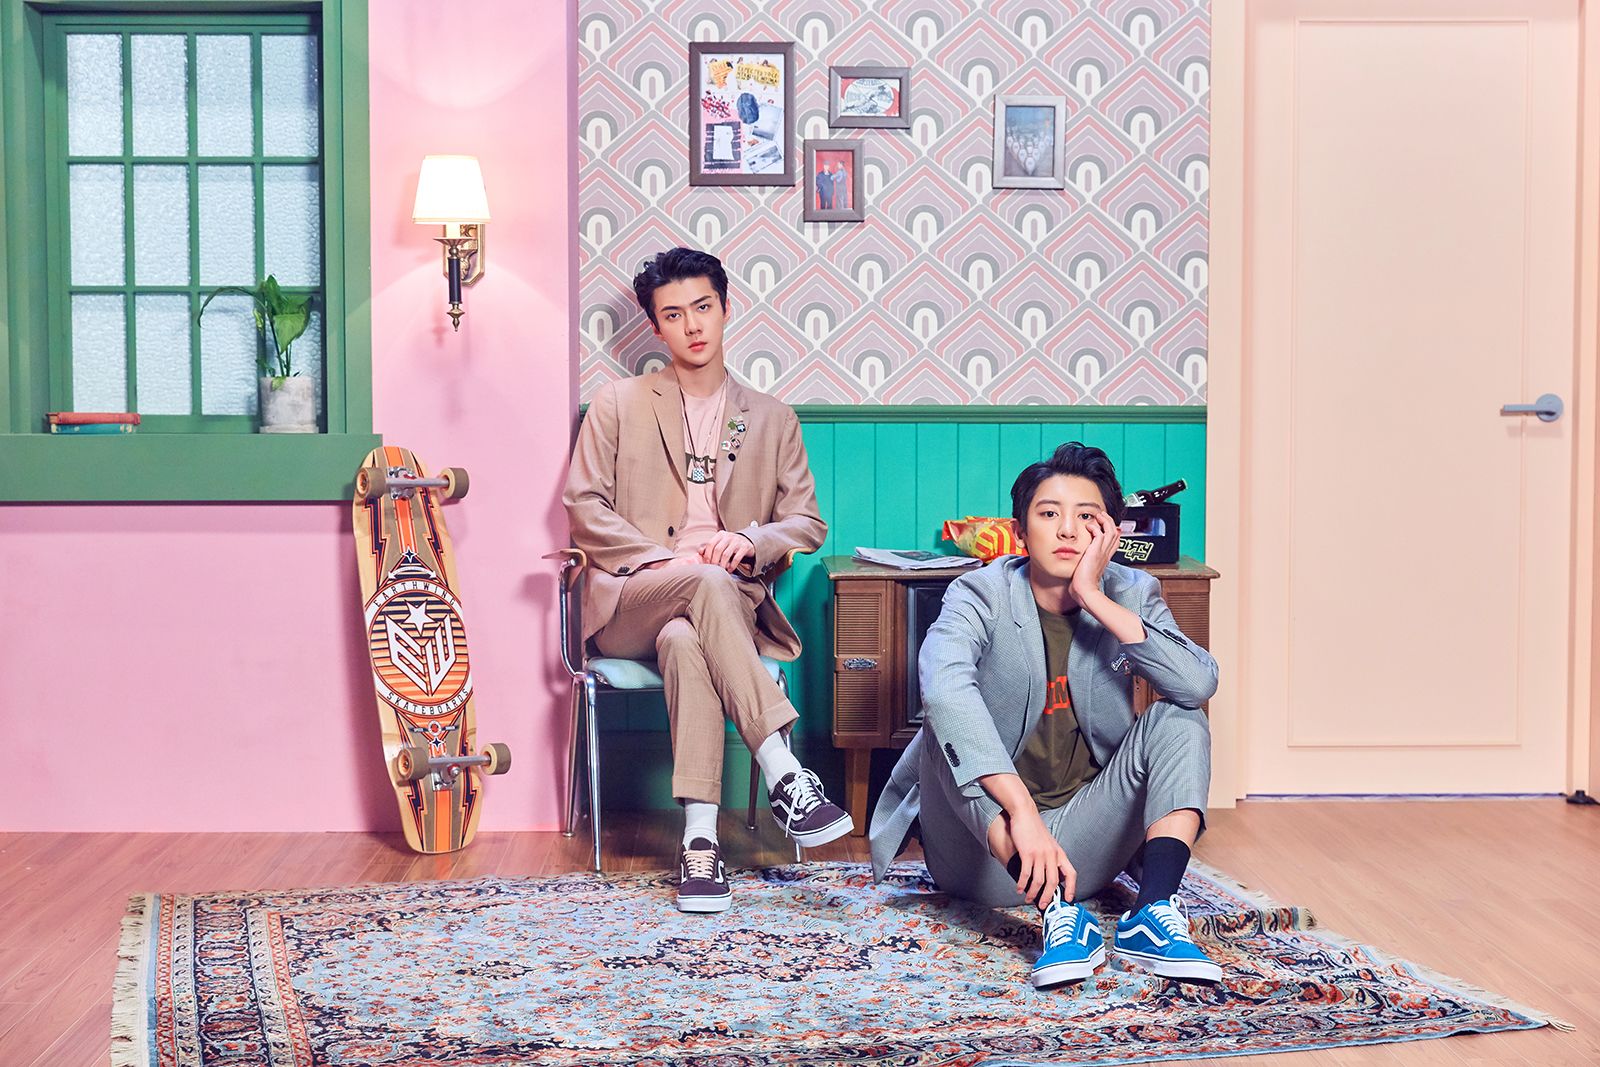 According to SM on the 4th, EXO Chanyeol and Sehun will be the third runners-up of Station Young (STATION X 0).The duet song We Young (Woi Young) will be released at 6 p.m. on the 14th at various music sites including Melon, Genie, iTunes, Sporty, Apple Music and Shami Music.The new song was first released at the Seoul Angkor performance E X O PLANET #4 - The Ely X iOn [dot] - , which was held in July at the EXOs fourth solo concert.Chanyeol and Sehun have gained a warm response from the audience with a bright and sophisticated stage that stands out.Station Young is a spin-off version of SM digital sound source public channel Station and is receiving a good response by releasing music sources created by limited-end collaborations such as Taeyeon X Melomance Page 0 (Page Young) and Baekhyun X Roko YOUNG (Young) sequentially as part of a cultural project conducted by SKT culture brand 0 (Young).